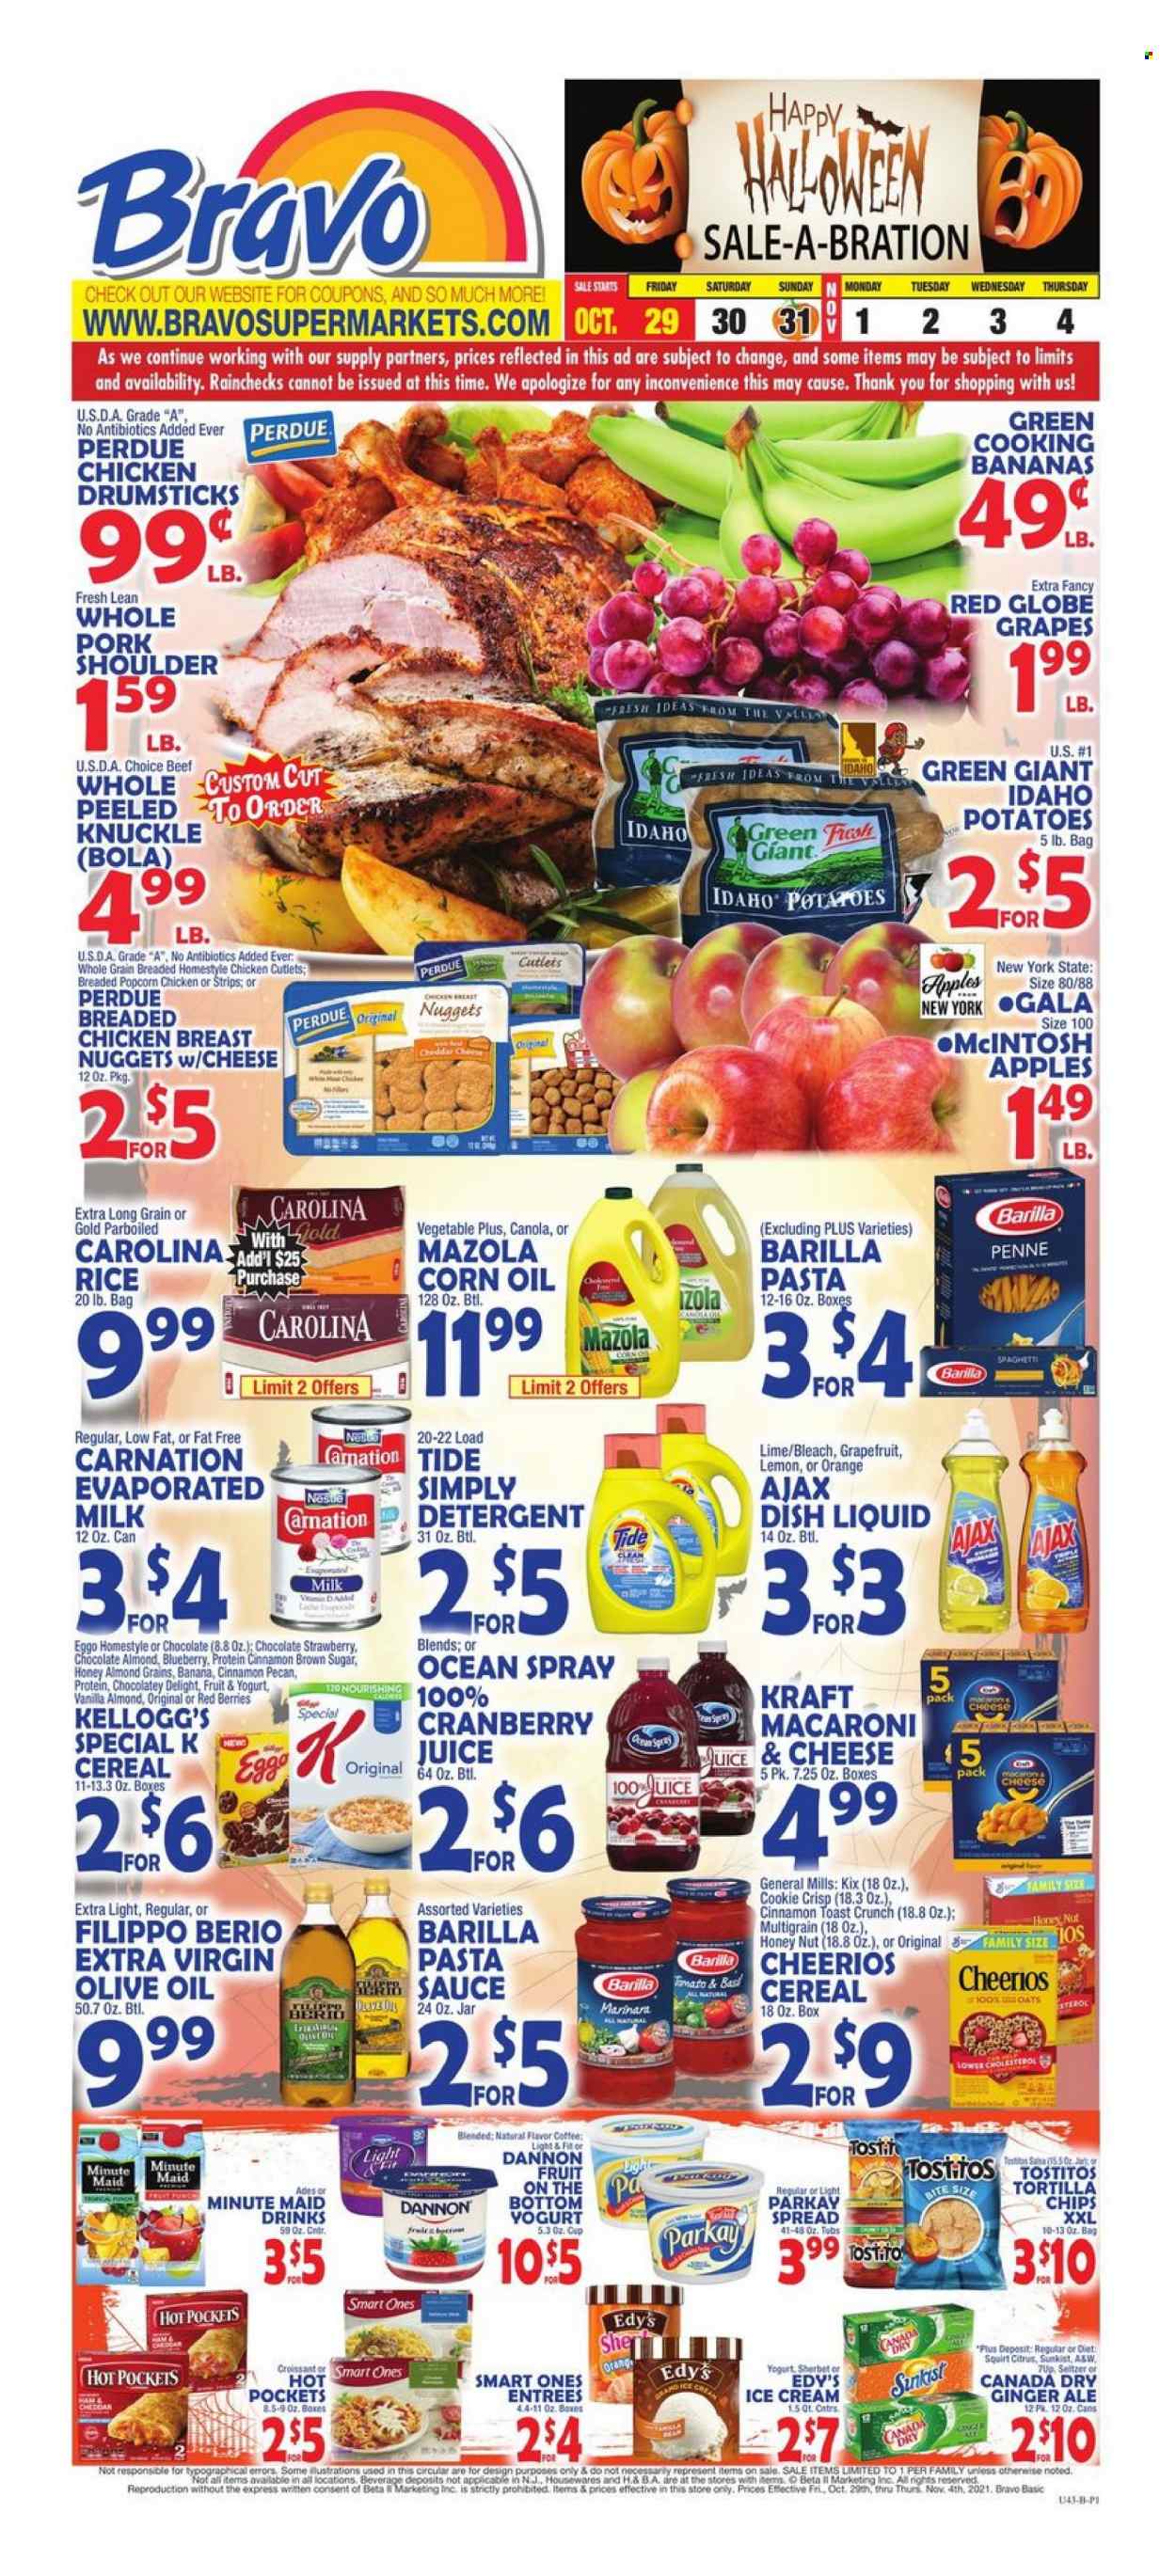 thumbnail - Bravo Supermarkets Flyer - 10/29/2021 - 11/04/2021 - Sales products - croissant, potatoes, apples, Gala, grapefruits, grapes, Red Globe, oranges, hot pocket, macaroni, nuggets, pasta, sauce, fried chicken, chicken nuggets, Barilla, Perdue®, Kraft®, Dannon, evaporated milk, ice cream, sherbet, strips, Kellogg's, tortilla chips, chips, popcorn, Tostitos, cane sugar, cereals, Cheerios, rice, parboiled rice, penne, cinnamon, salsa, corn oil, extra virgin olive oil, olive oil, Canada Dry, cranberry juice, ginger ale, juice, 7UP, fruit punch, seltzer water, coffee, Ron Pelicano, chicken cutlets, chicken drumsticks, pork meat, pork shoulder, detergent, bleach, Ajax, Tide, dishwashing liquid. Page 1.